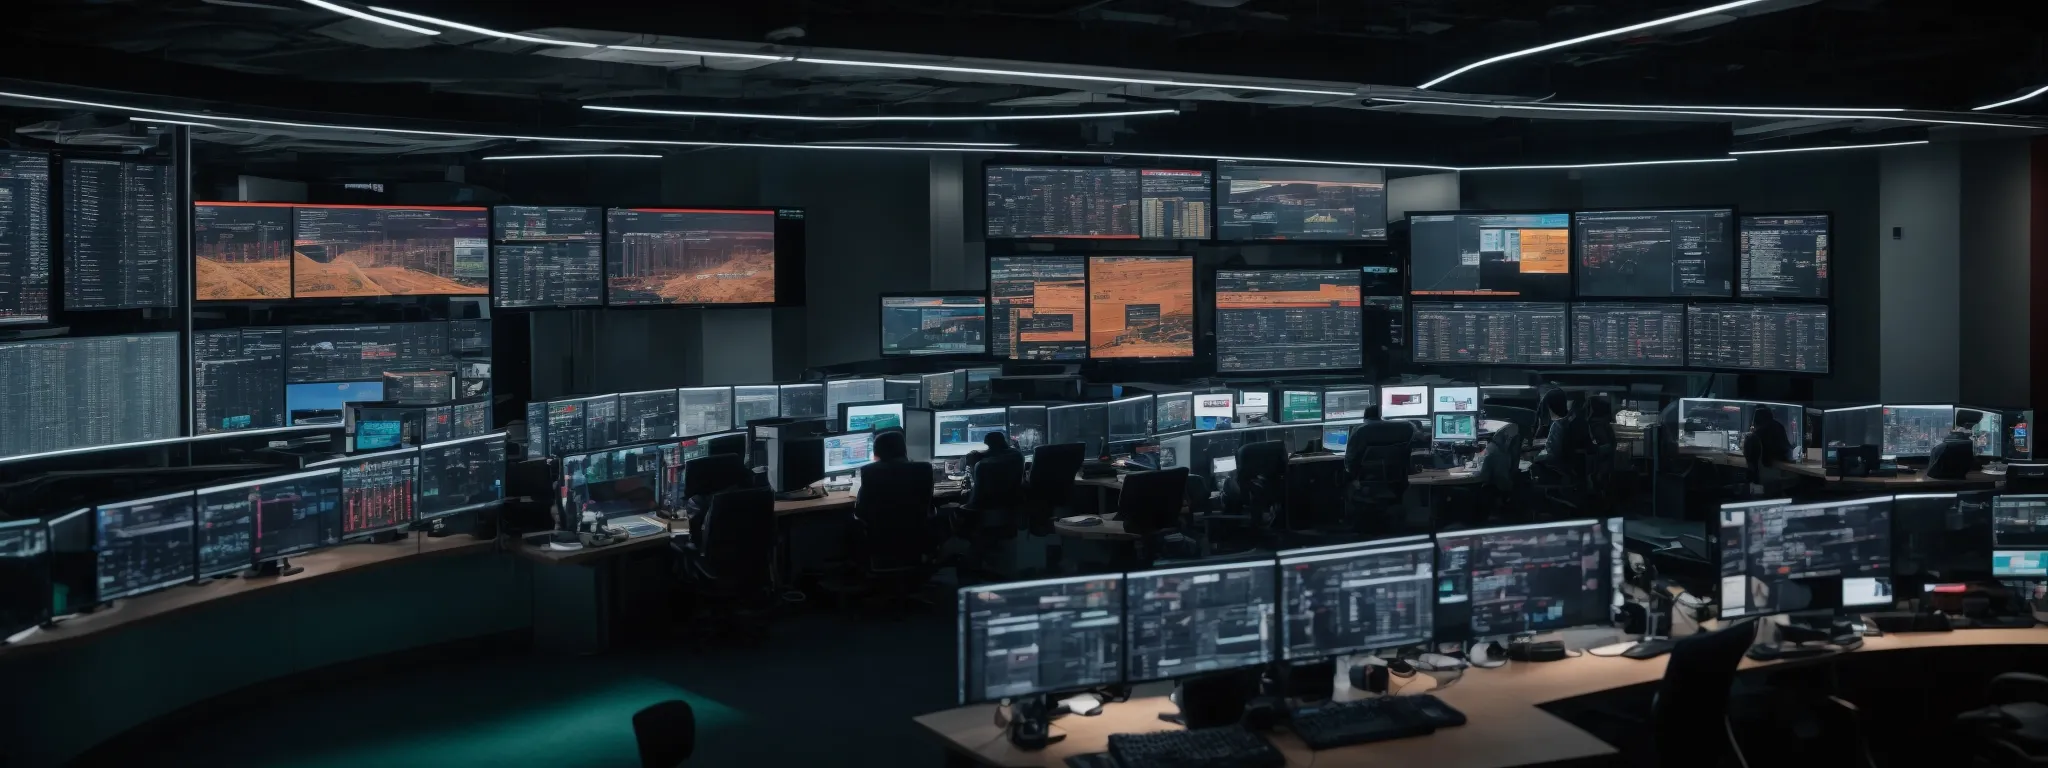 a high-tech command center with screens displaying website analytics and performance metrics.